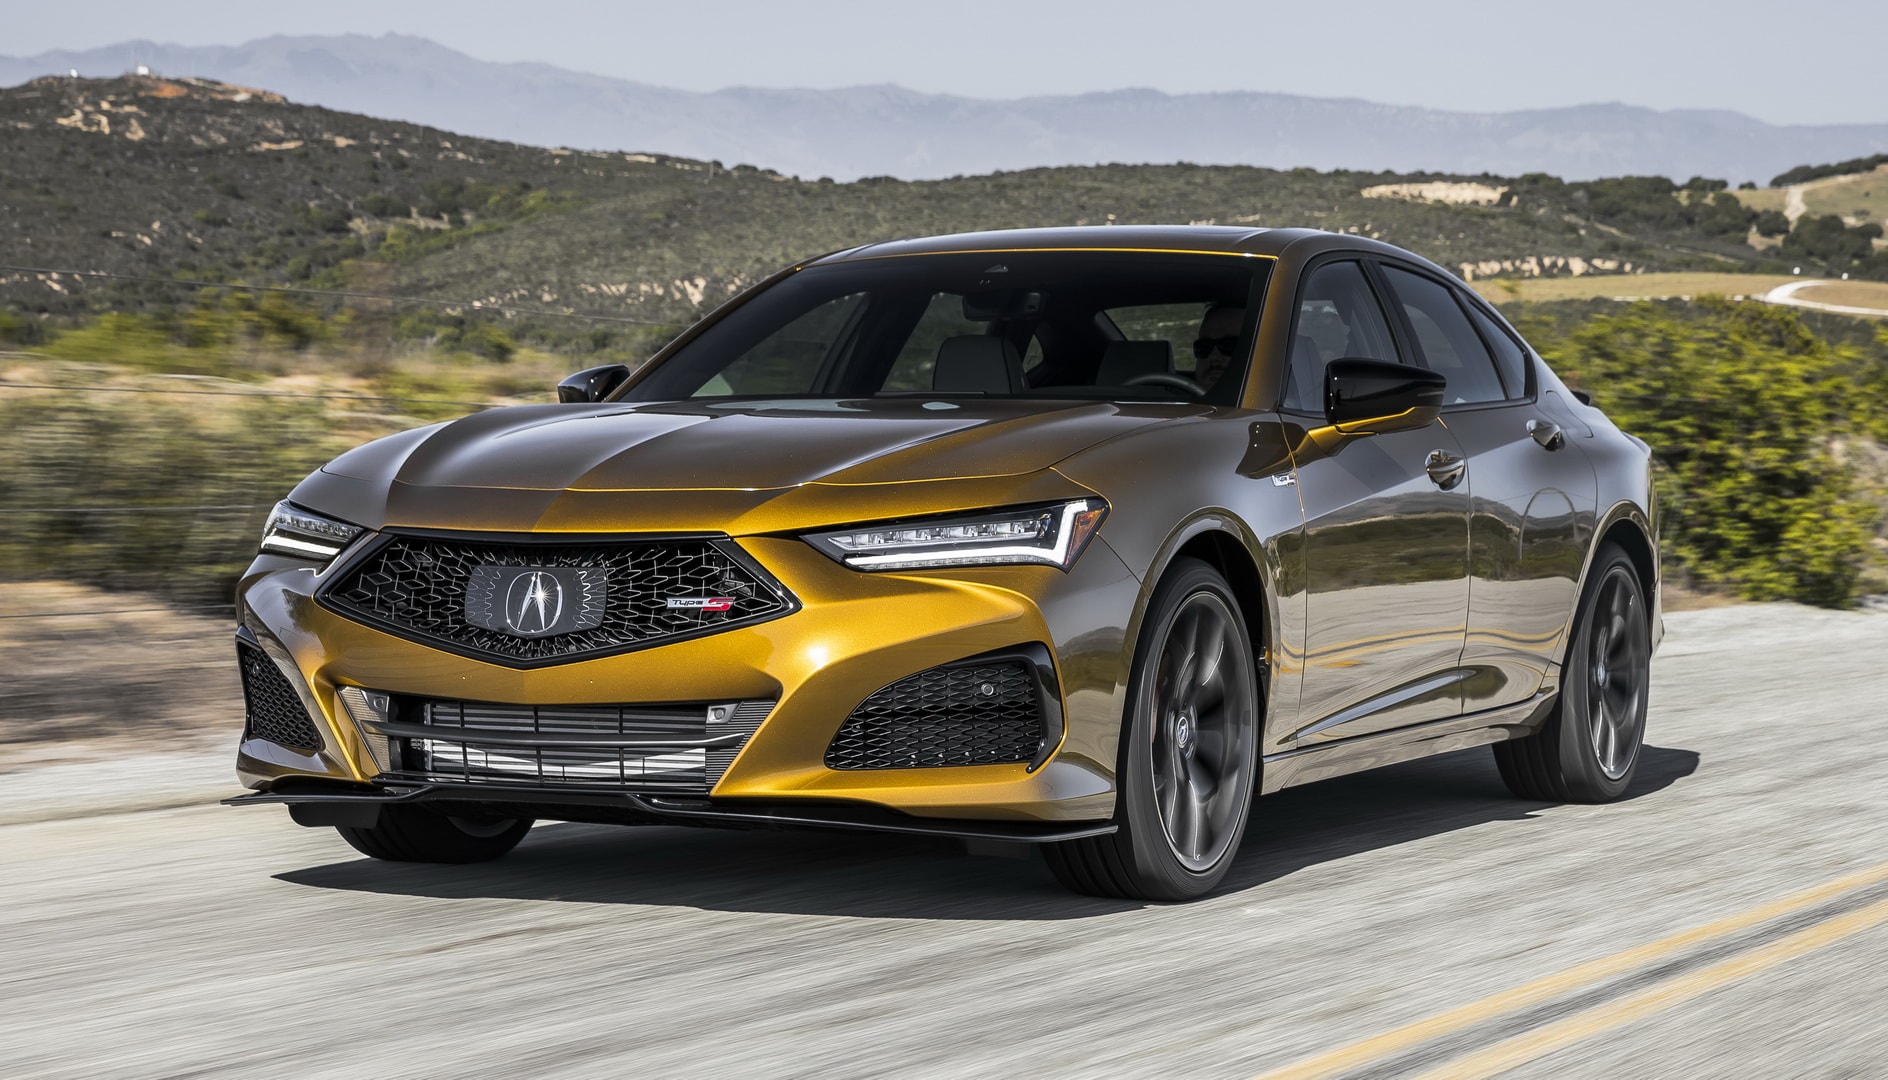 2021 Acura TLX Type S on Sale June 23 From 52,300, Costs Less Than a